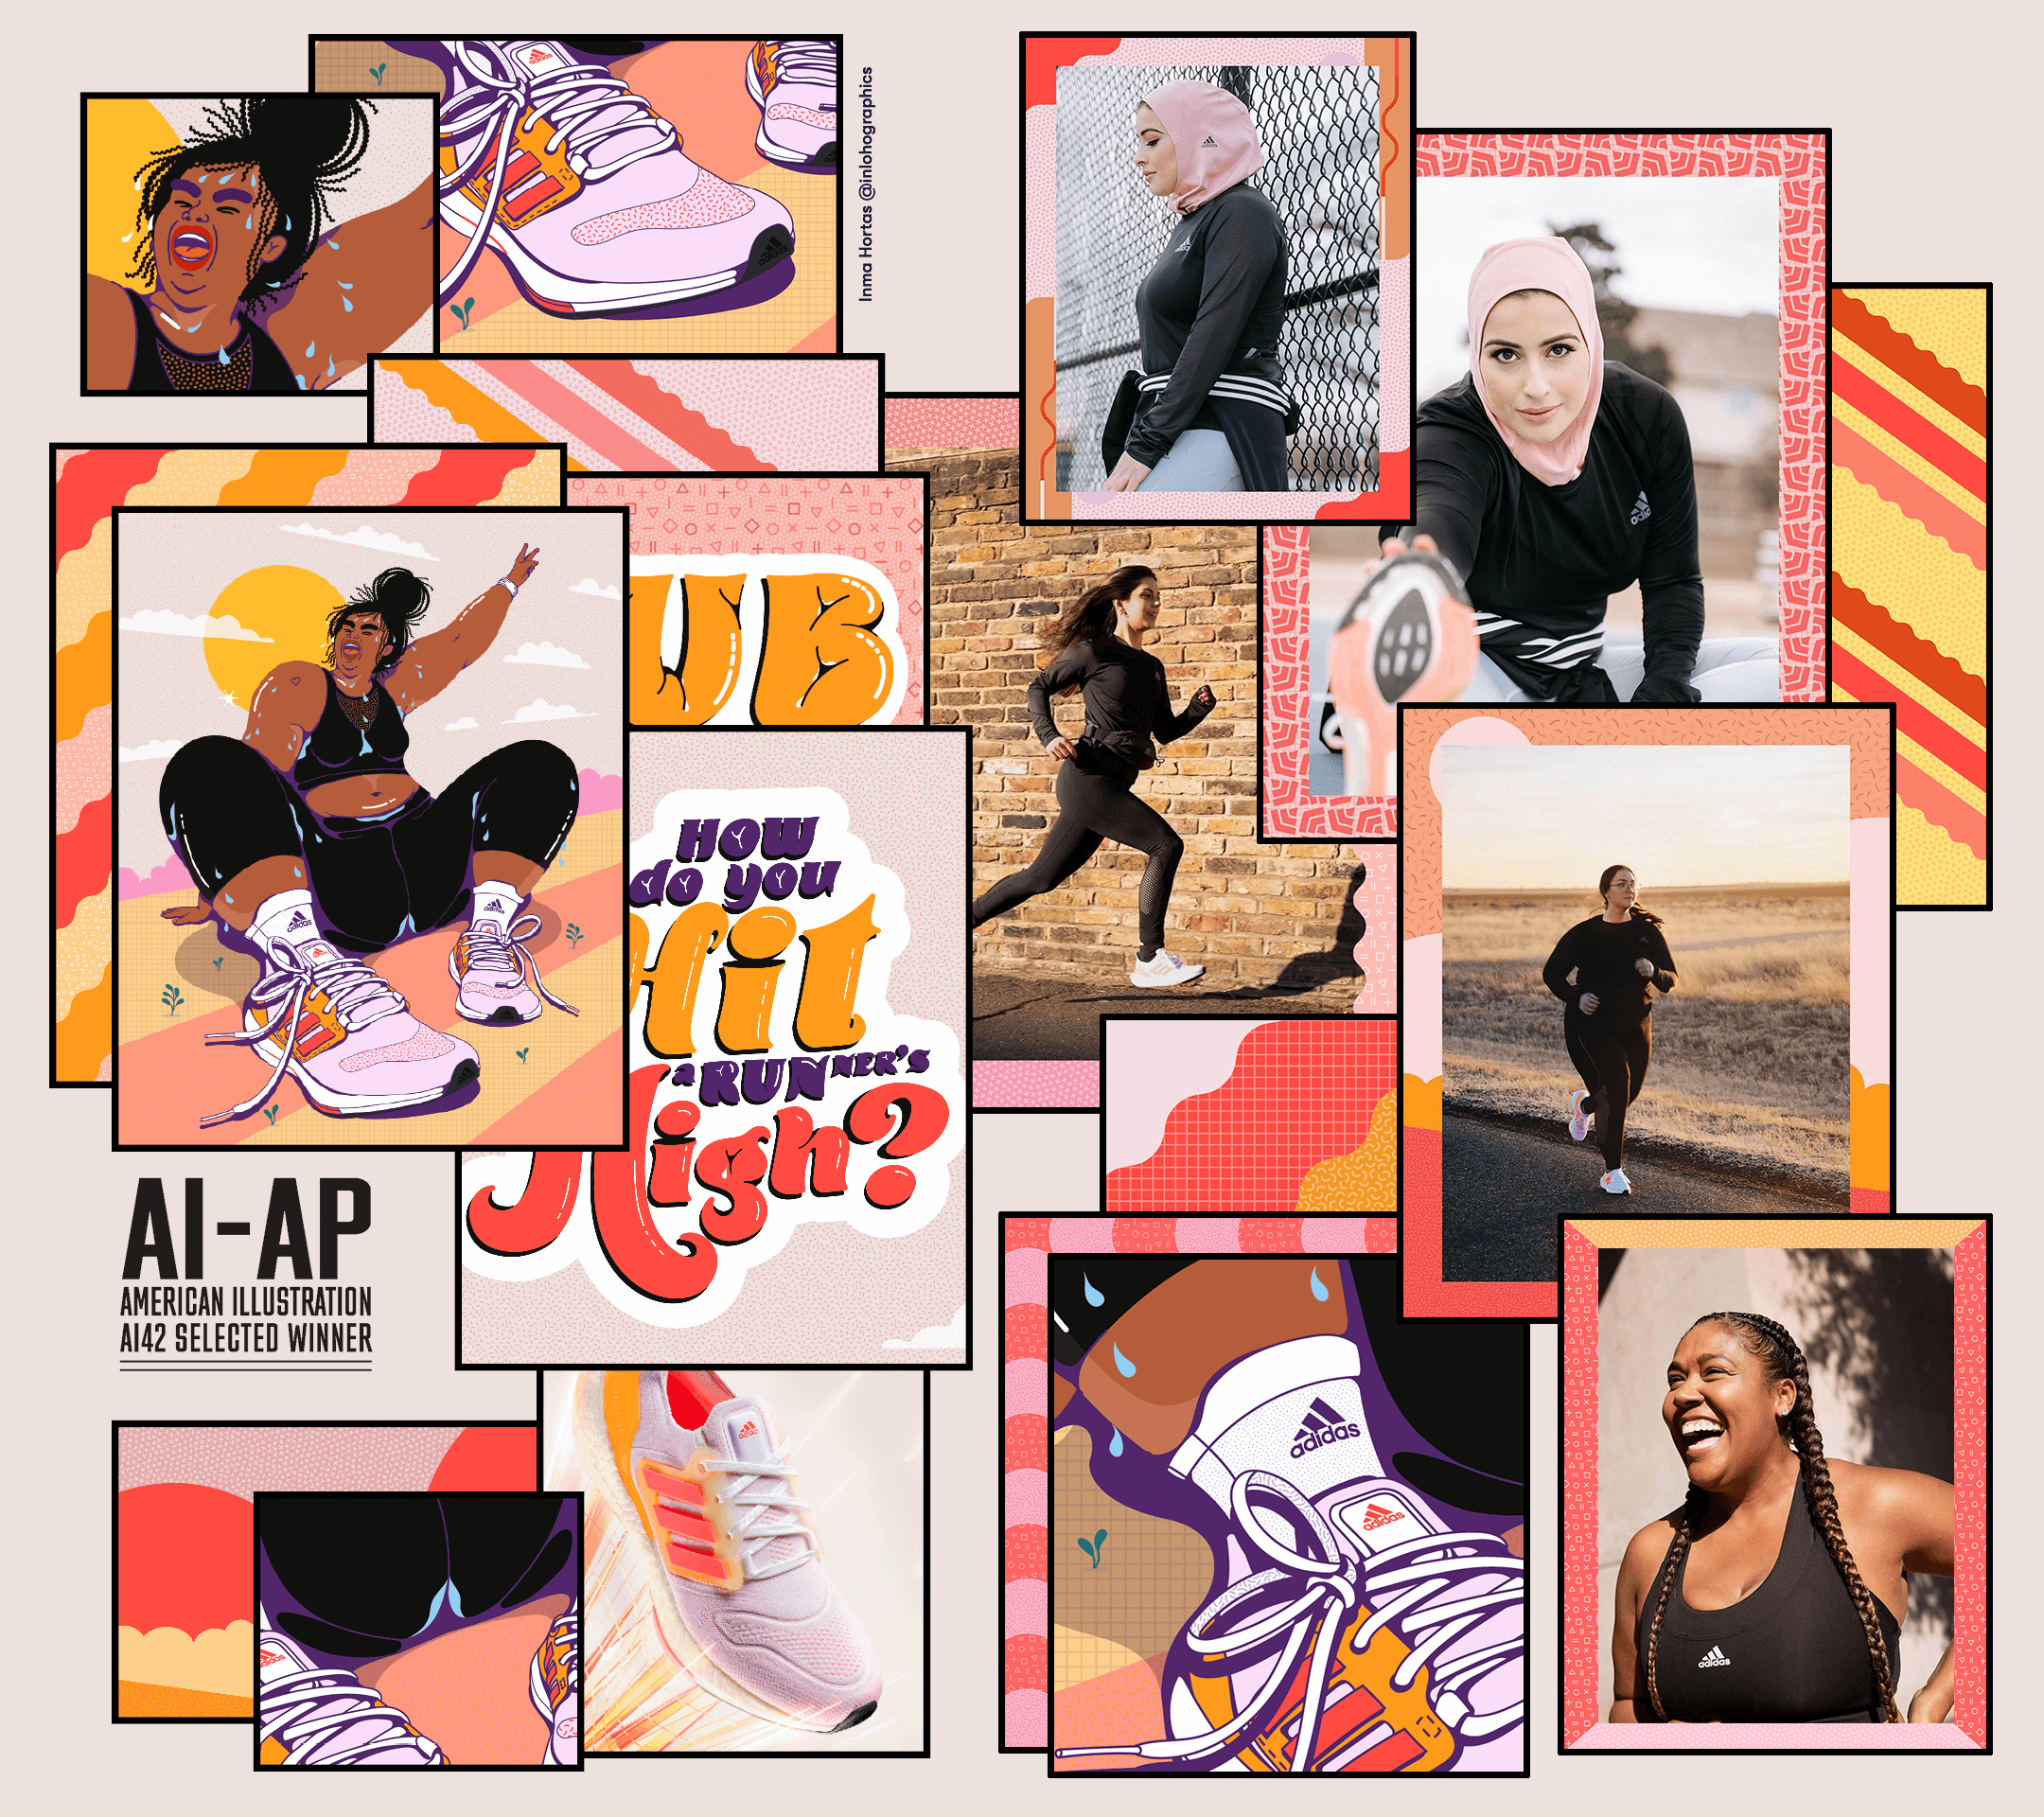 Adidas Ultraboost 22 female fit campaign on socials. Set of assets. American Illustration 42 SELECTED WINNER.